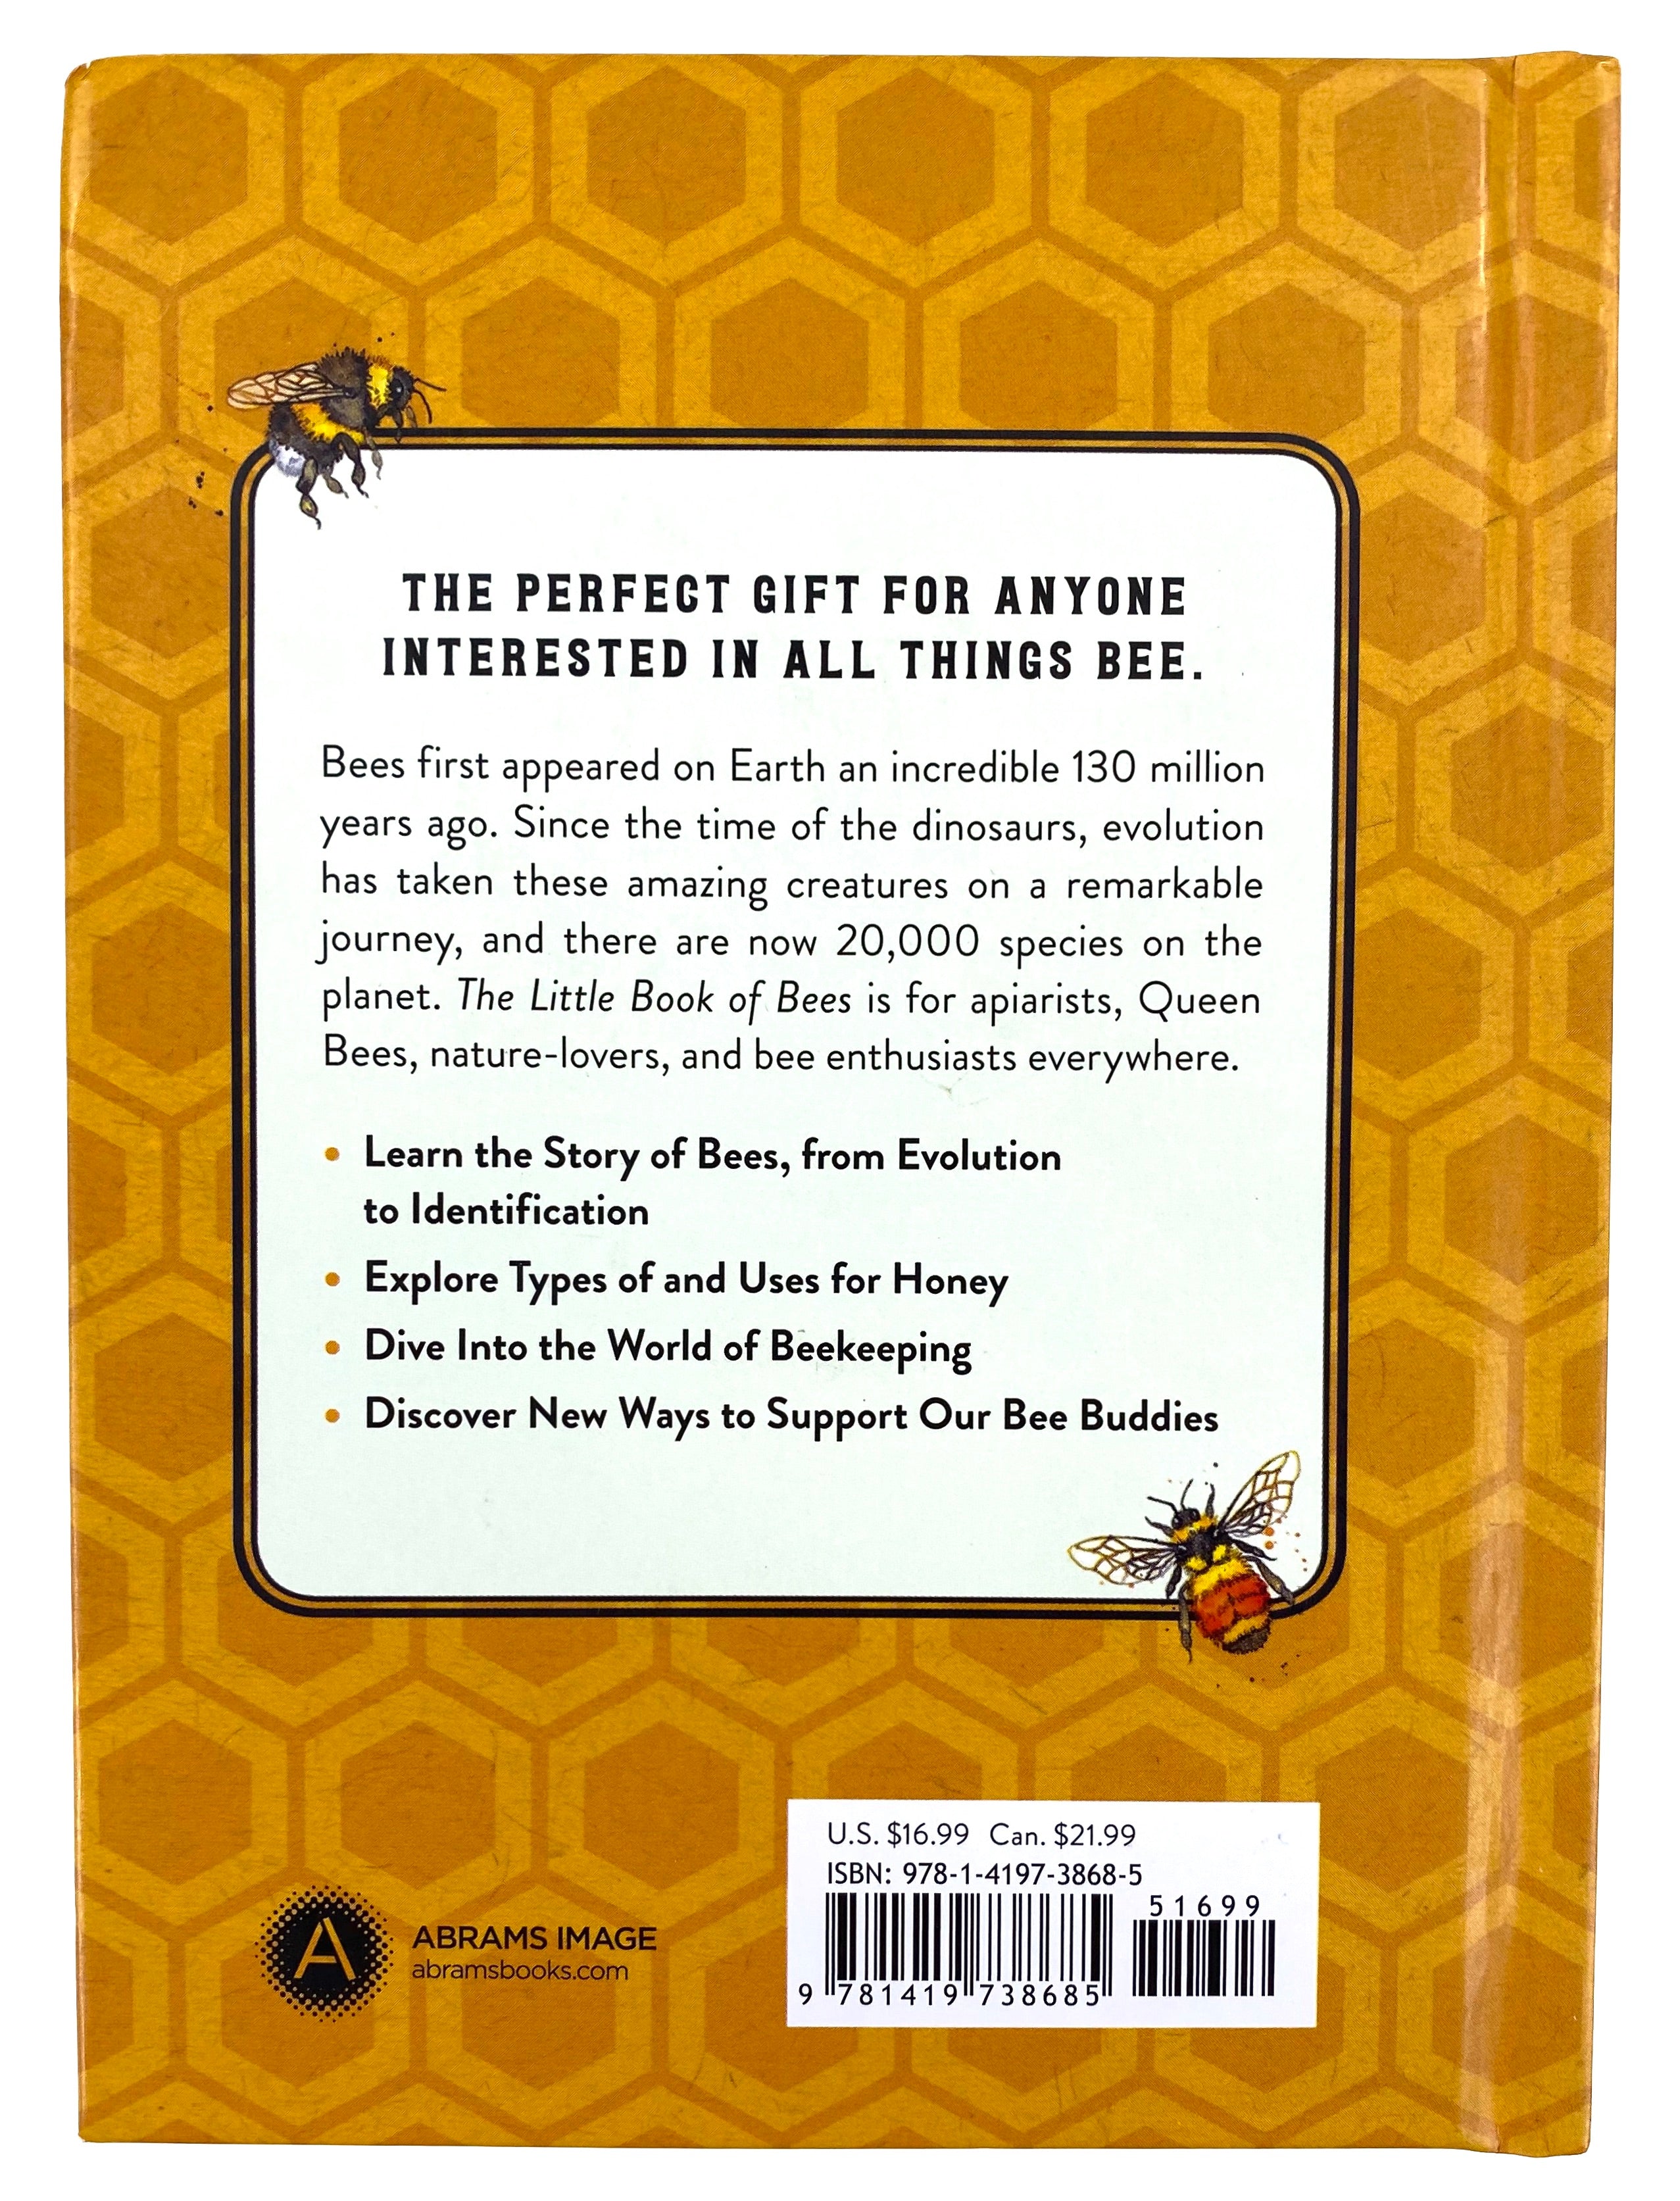 The Little Book of Bees    